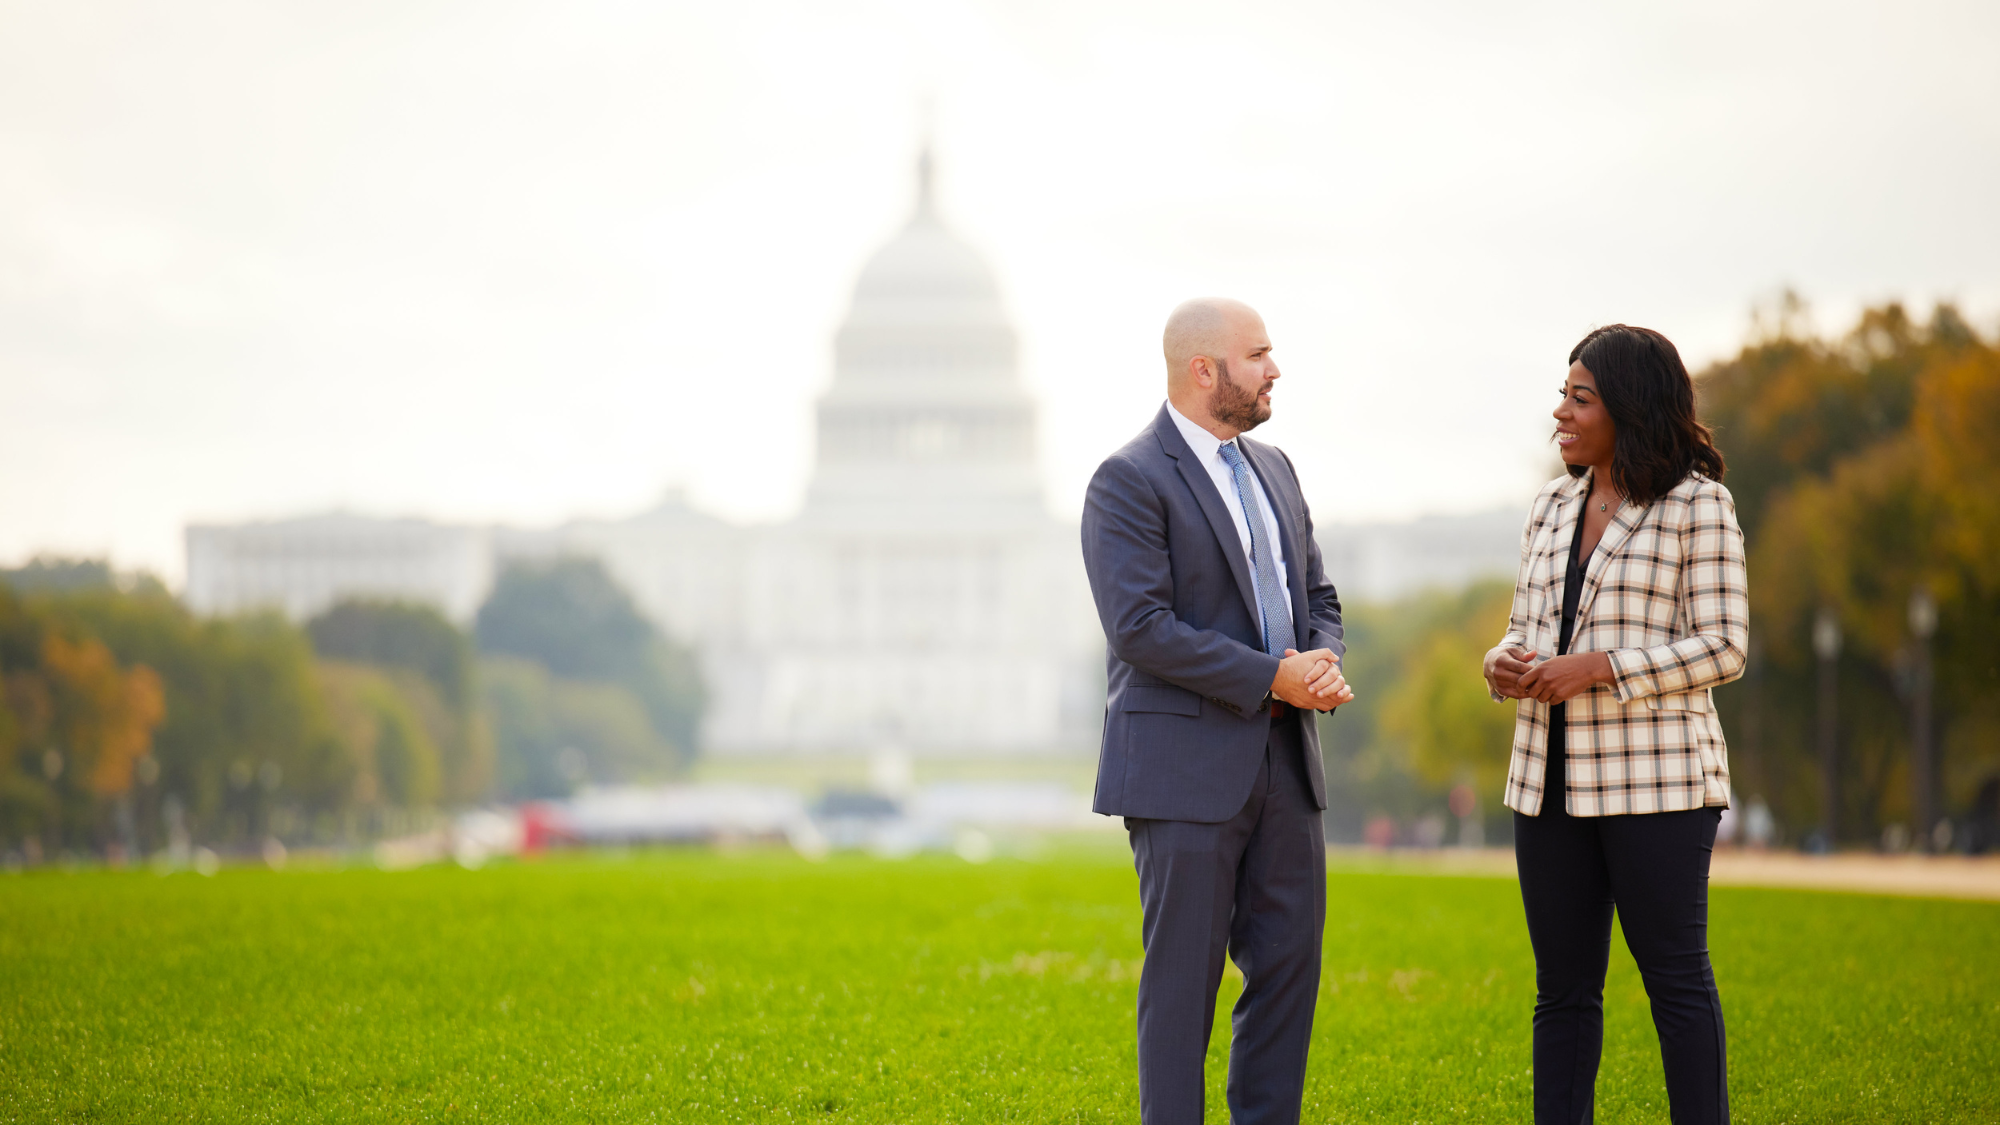 Two MBA students talking in front of the National Mall in Washington, D.C.